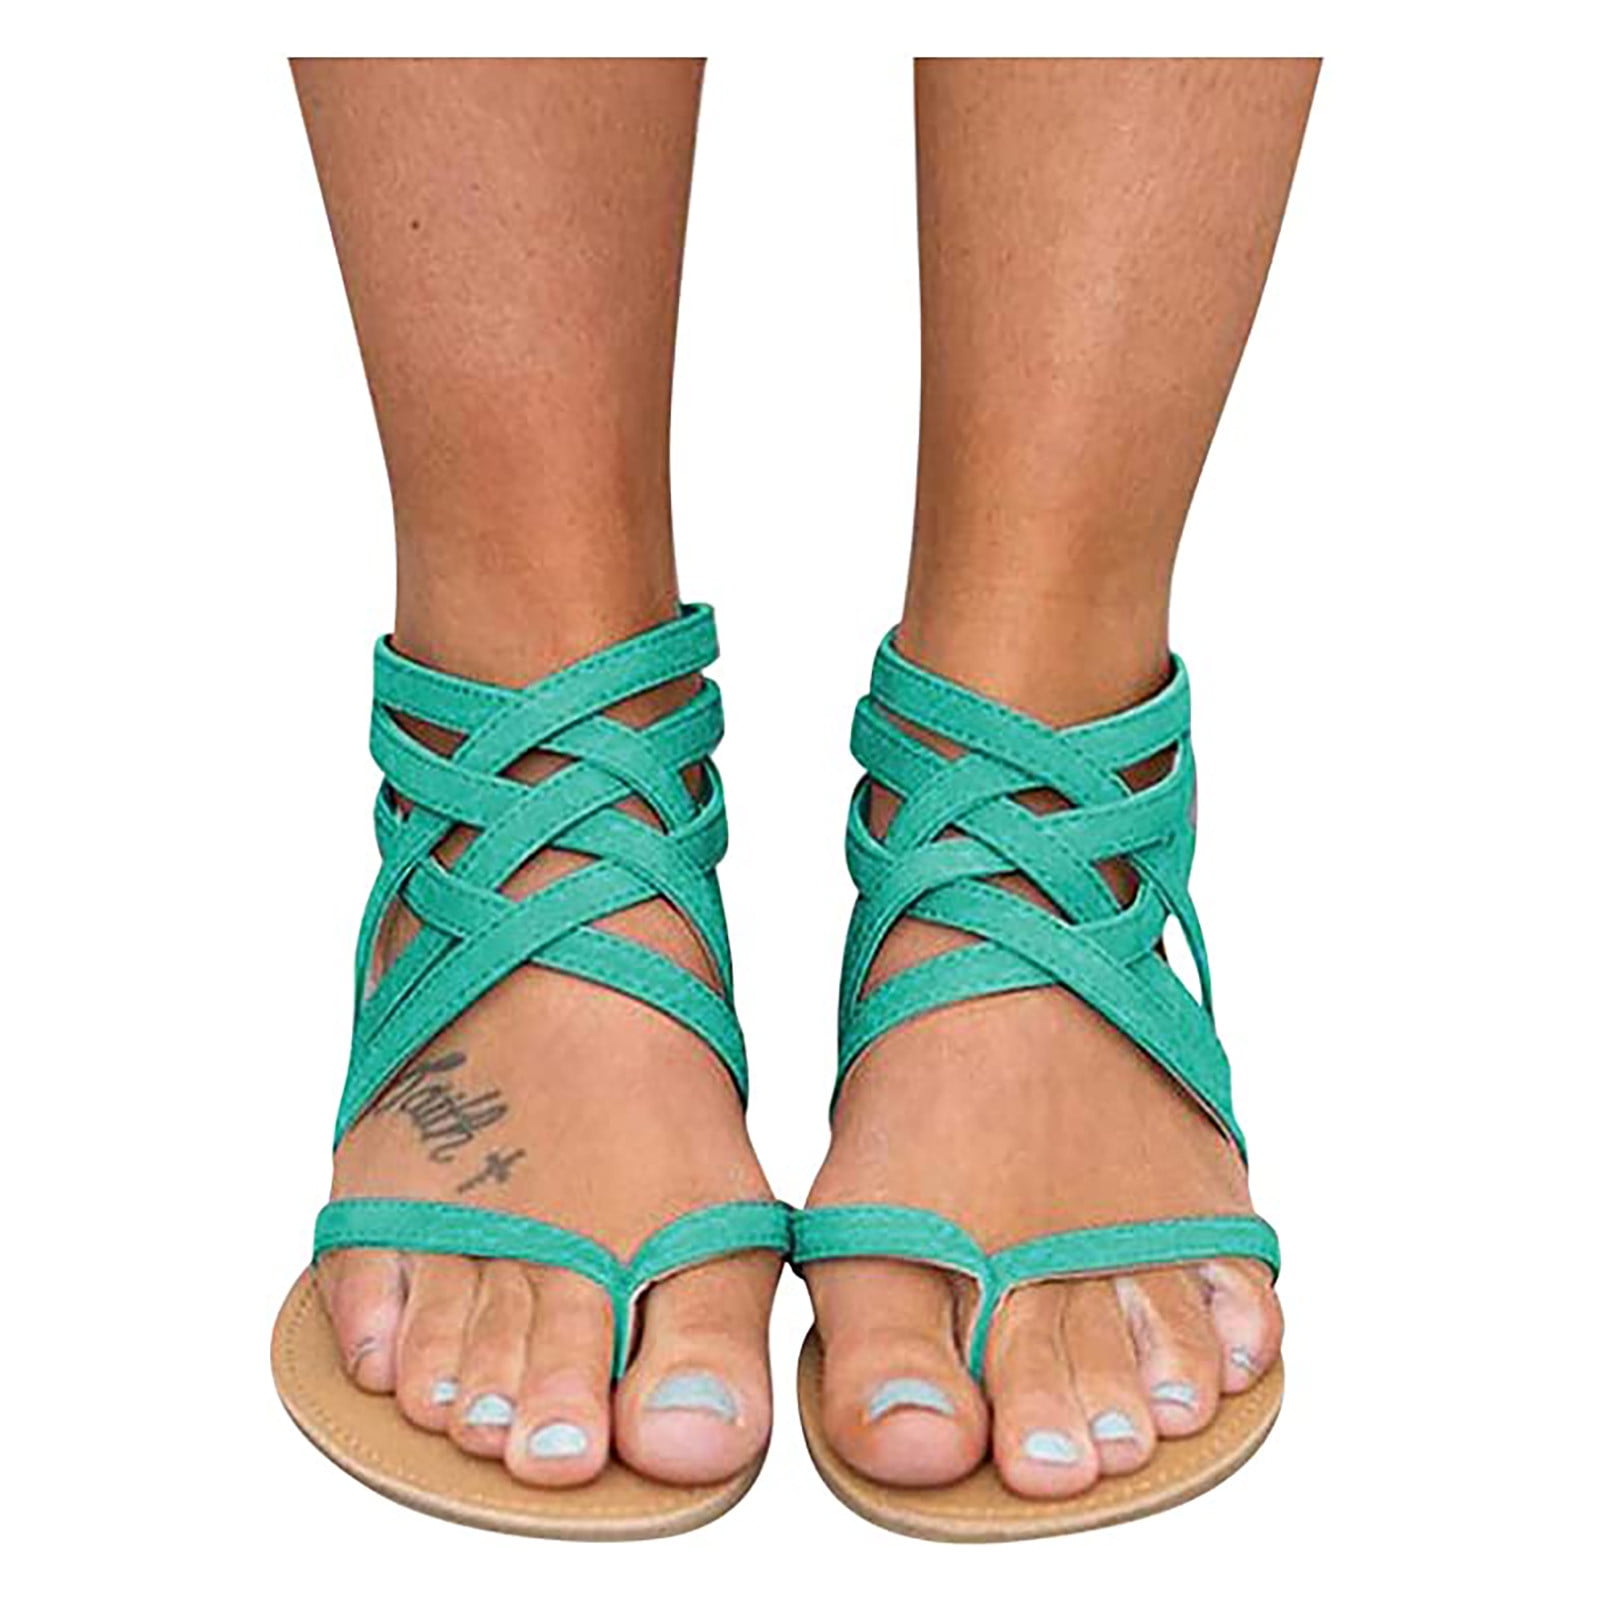 Beach Breathable Flat Buckle Strap Sandals Rome Shoes,2019 New Womens Summer Peep Toe Shoes 